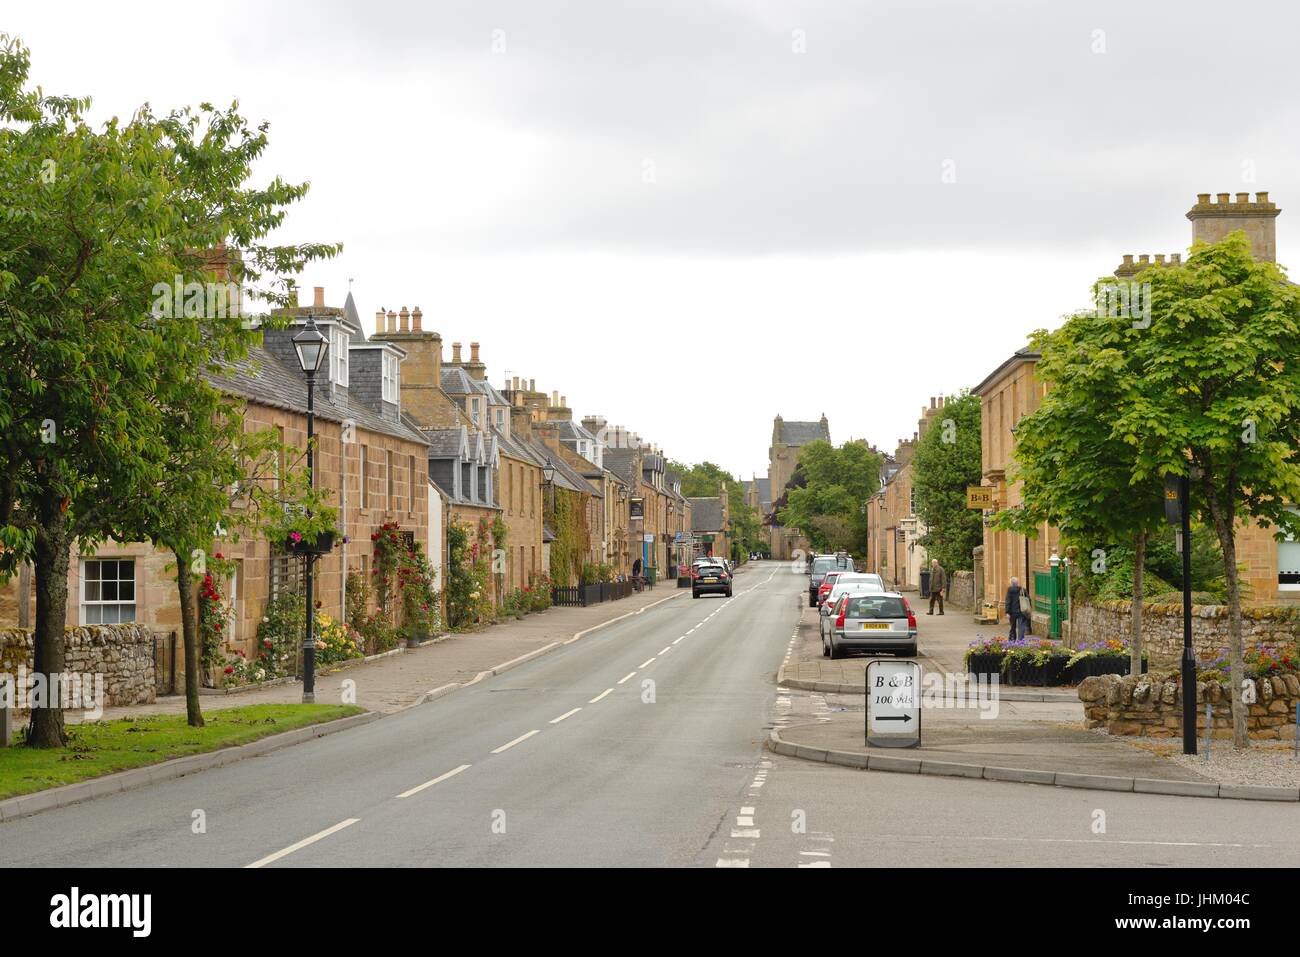 Looking down Castle Street which is the main road through the town of Dornoch in Sutherland, Scotland, UK Stock Photo